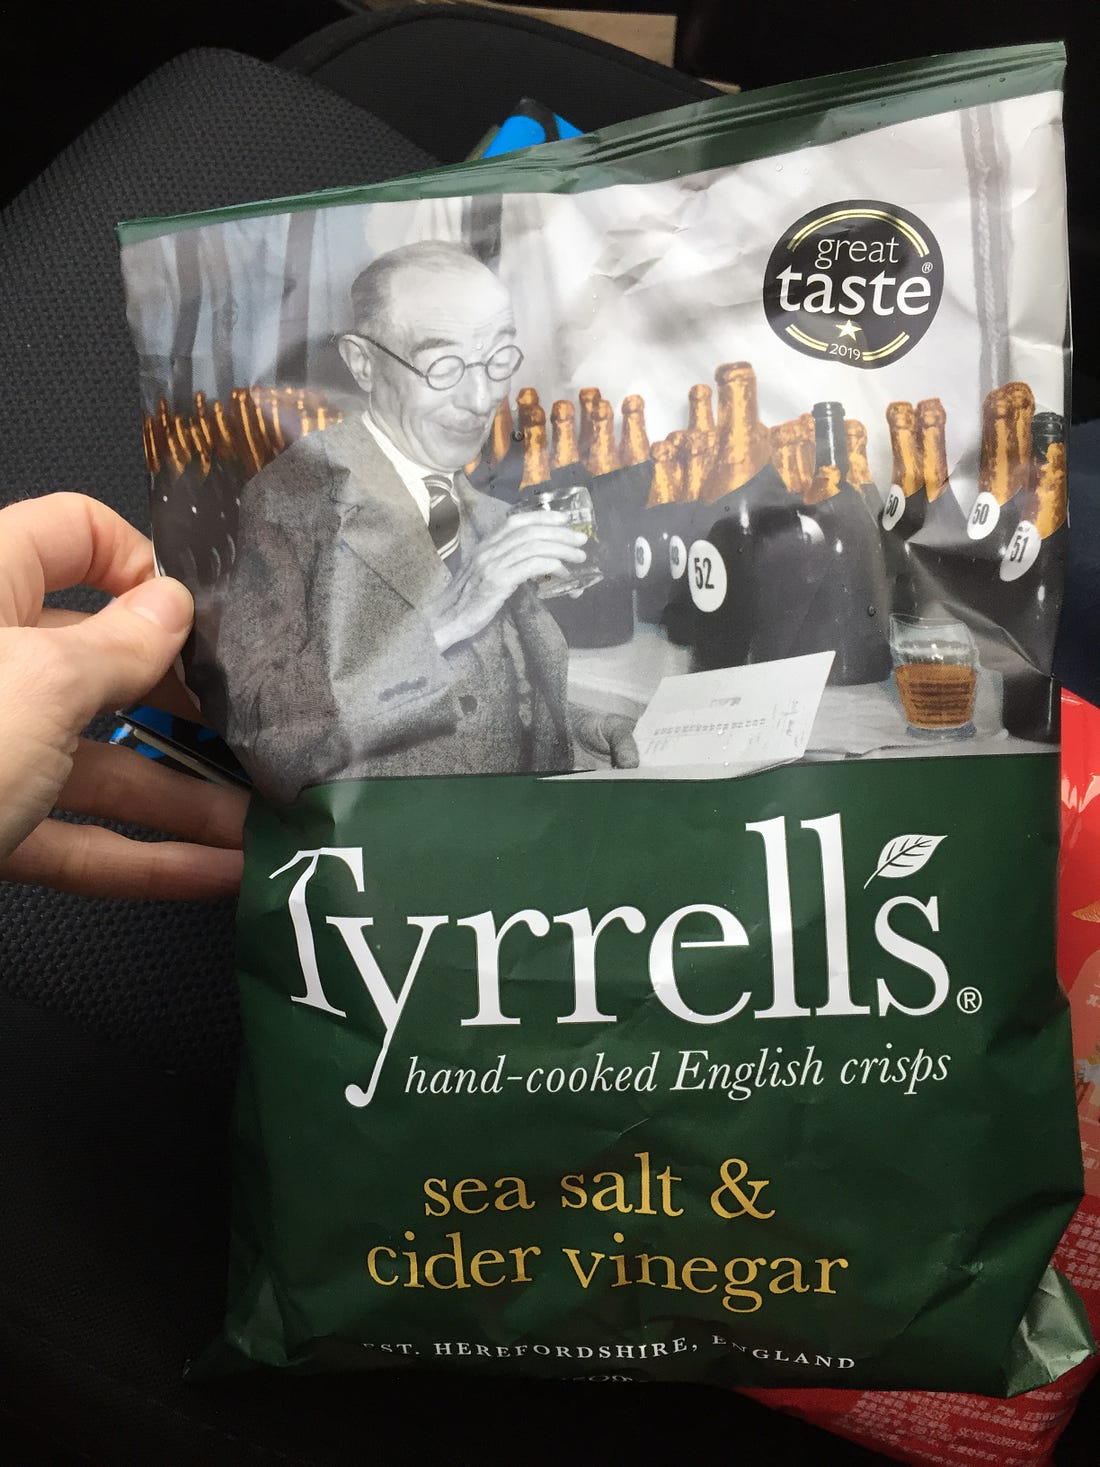 My hand holding up a bag of Tyrell's sea salt & cider vinegar chips. The bag is green with white and yellow text, and at the top is a black & white photograph of a man staring into a small glass of beer, with many more bottles in the background.